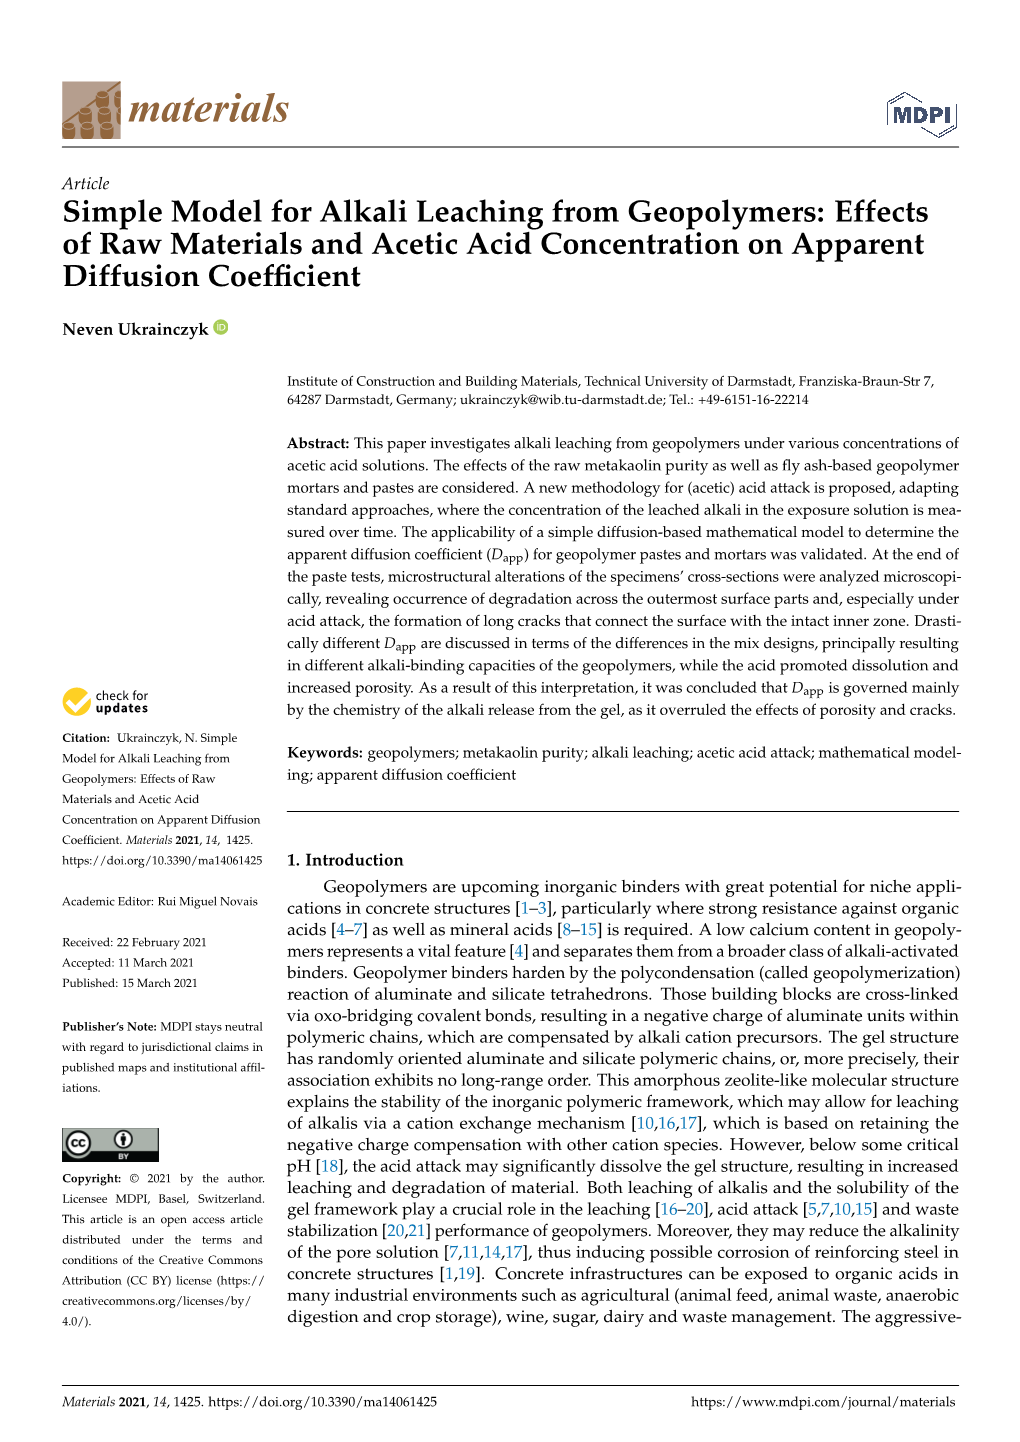 Simple Model for Alkali Leaching from Geopolymers: Effects of Raw Materials and Acetic Acid Concentration on Apparent Diffusion Coefﬁcient